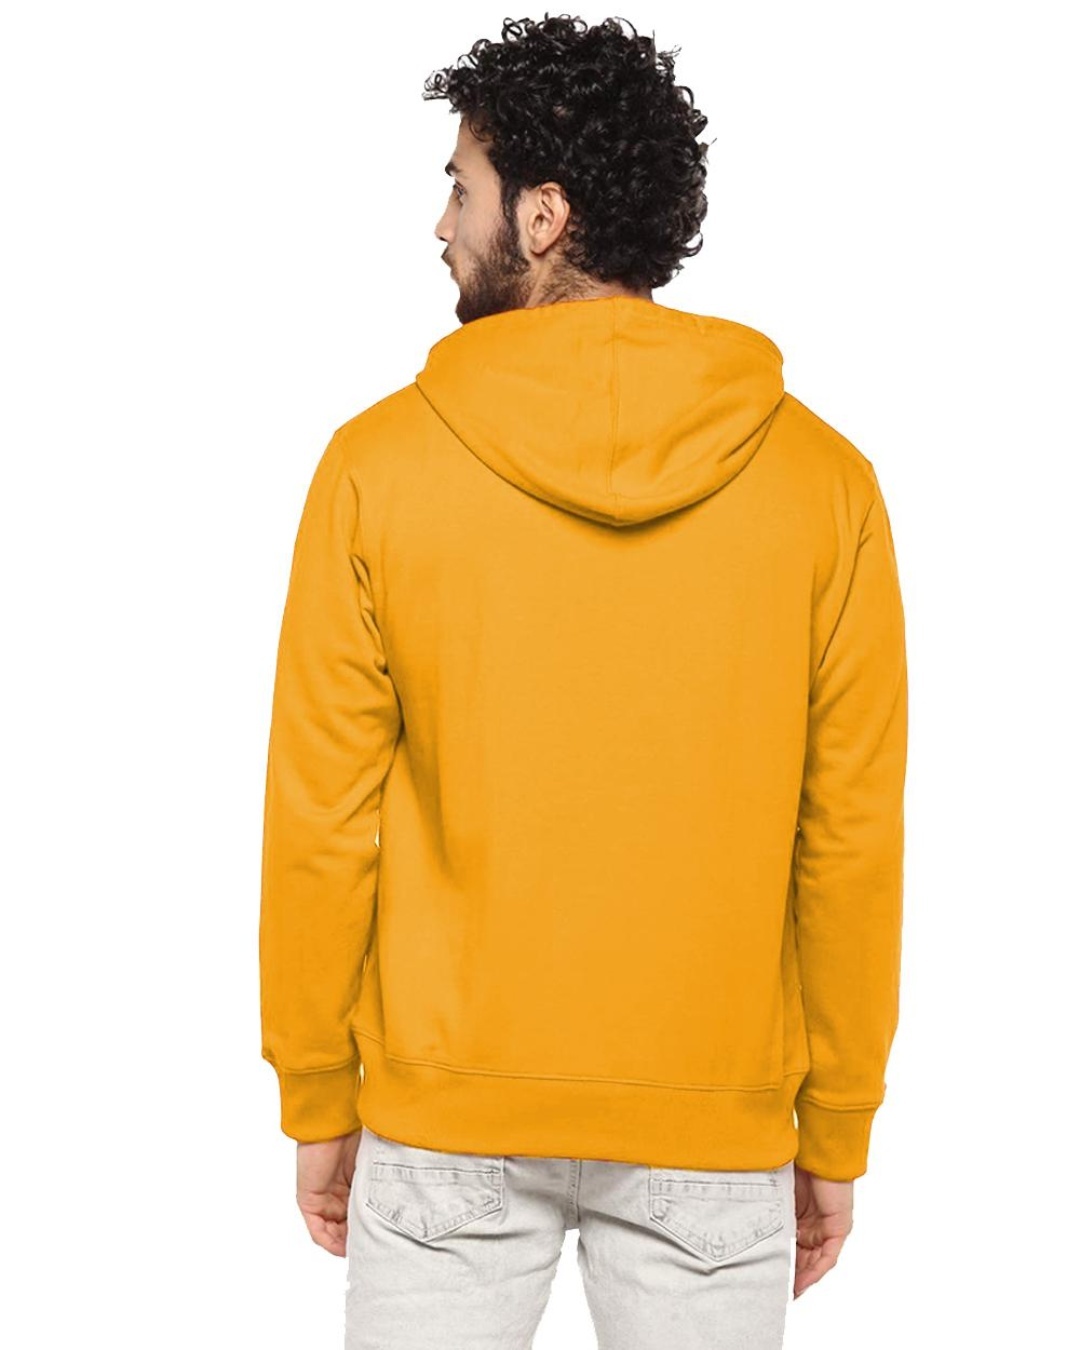 Shop Men's Yellow Always Stay Strong Graphic Printed Hoodie-Back